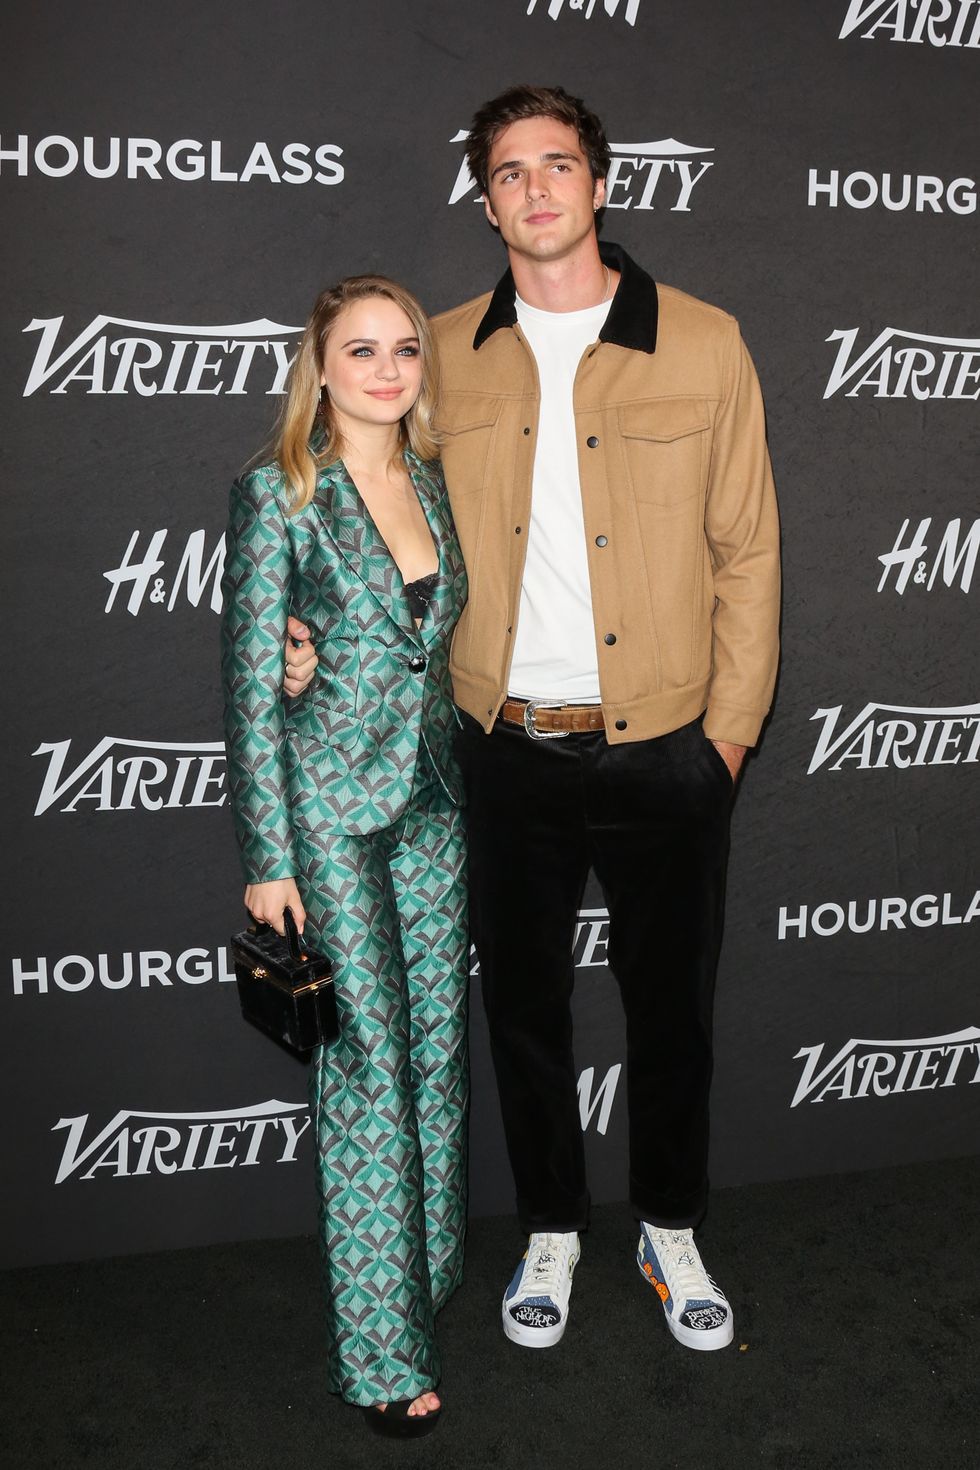 west hollywood, ca august 28 actors joey king l and jacob elordi r attend varietys annual power of young hollywood at the sunset tower hotel on august 28, 2018 in west hollywood, california photo by paul archuletafilmmagic